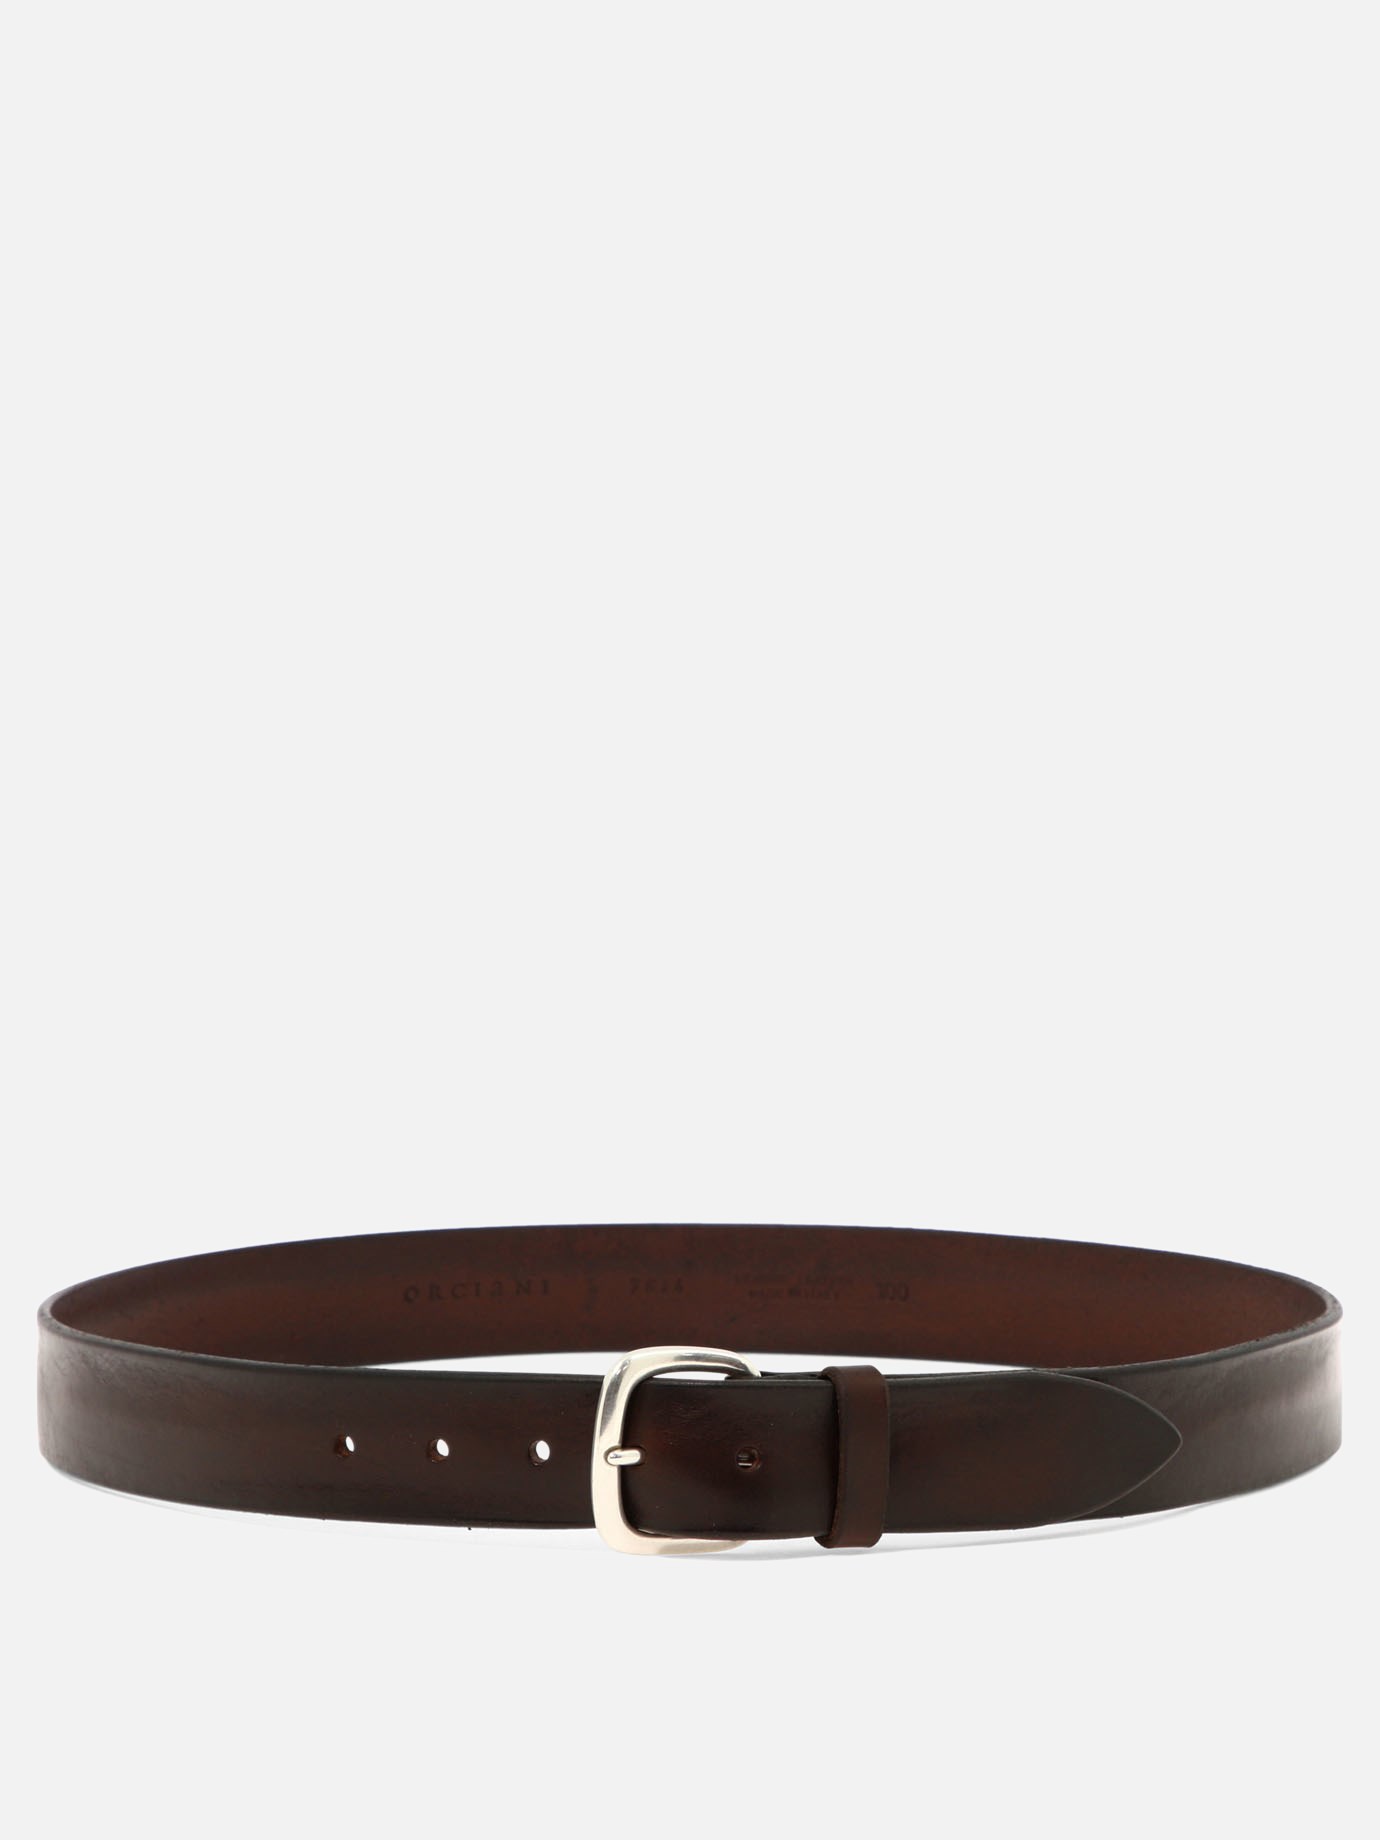  Bull Soft  beltby Orciani - 5